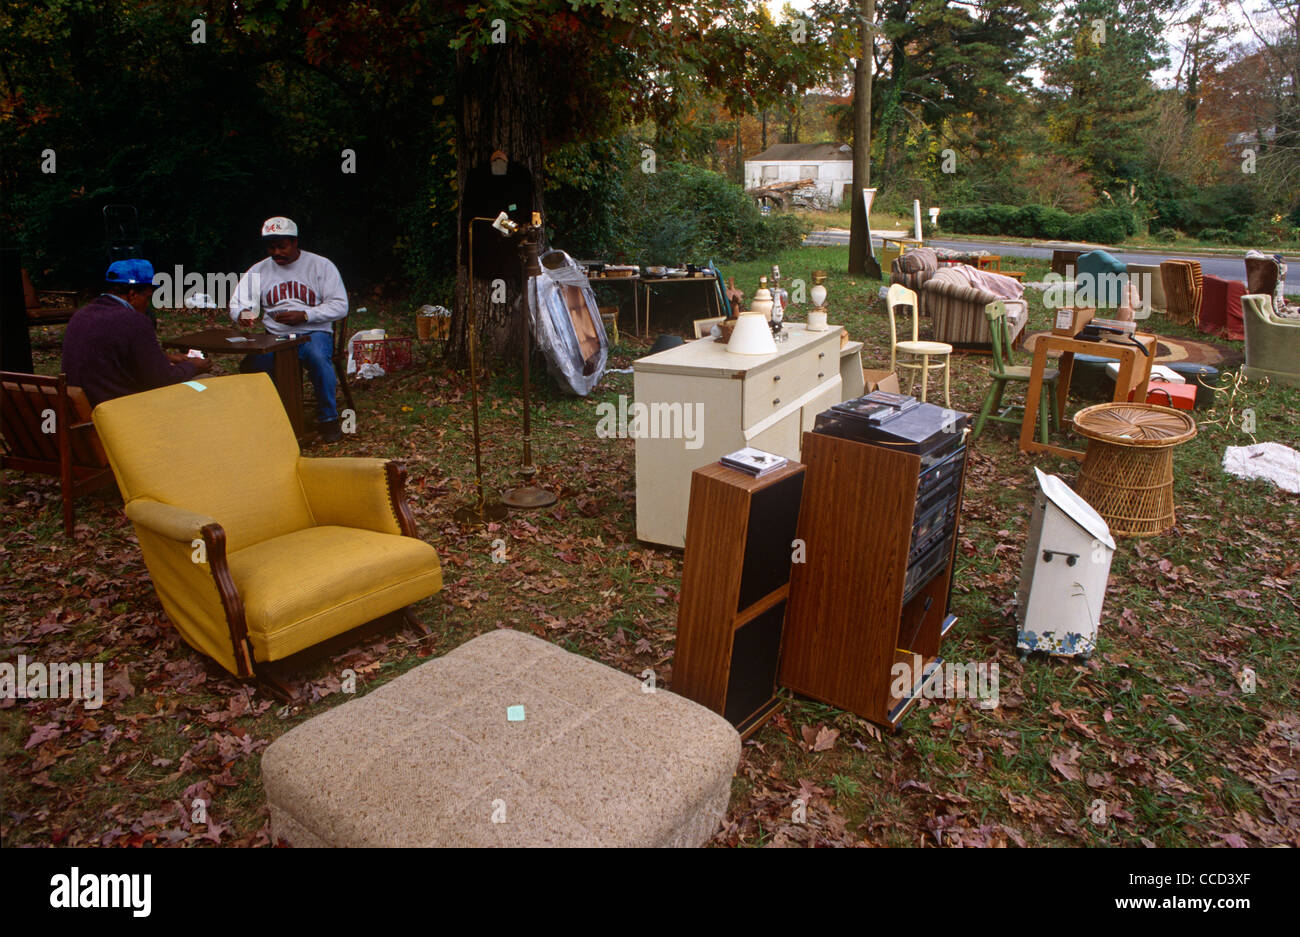 Two Georgian men play cards while waiting for passing trade during an outdoor yard sale in an Atlanta suburb. Stock Photo